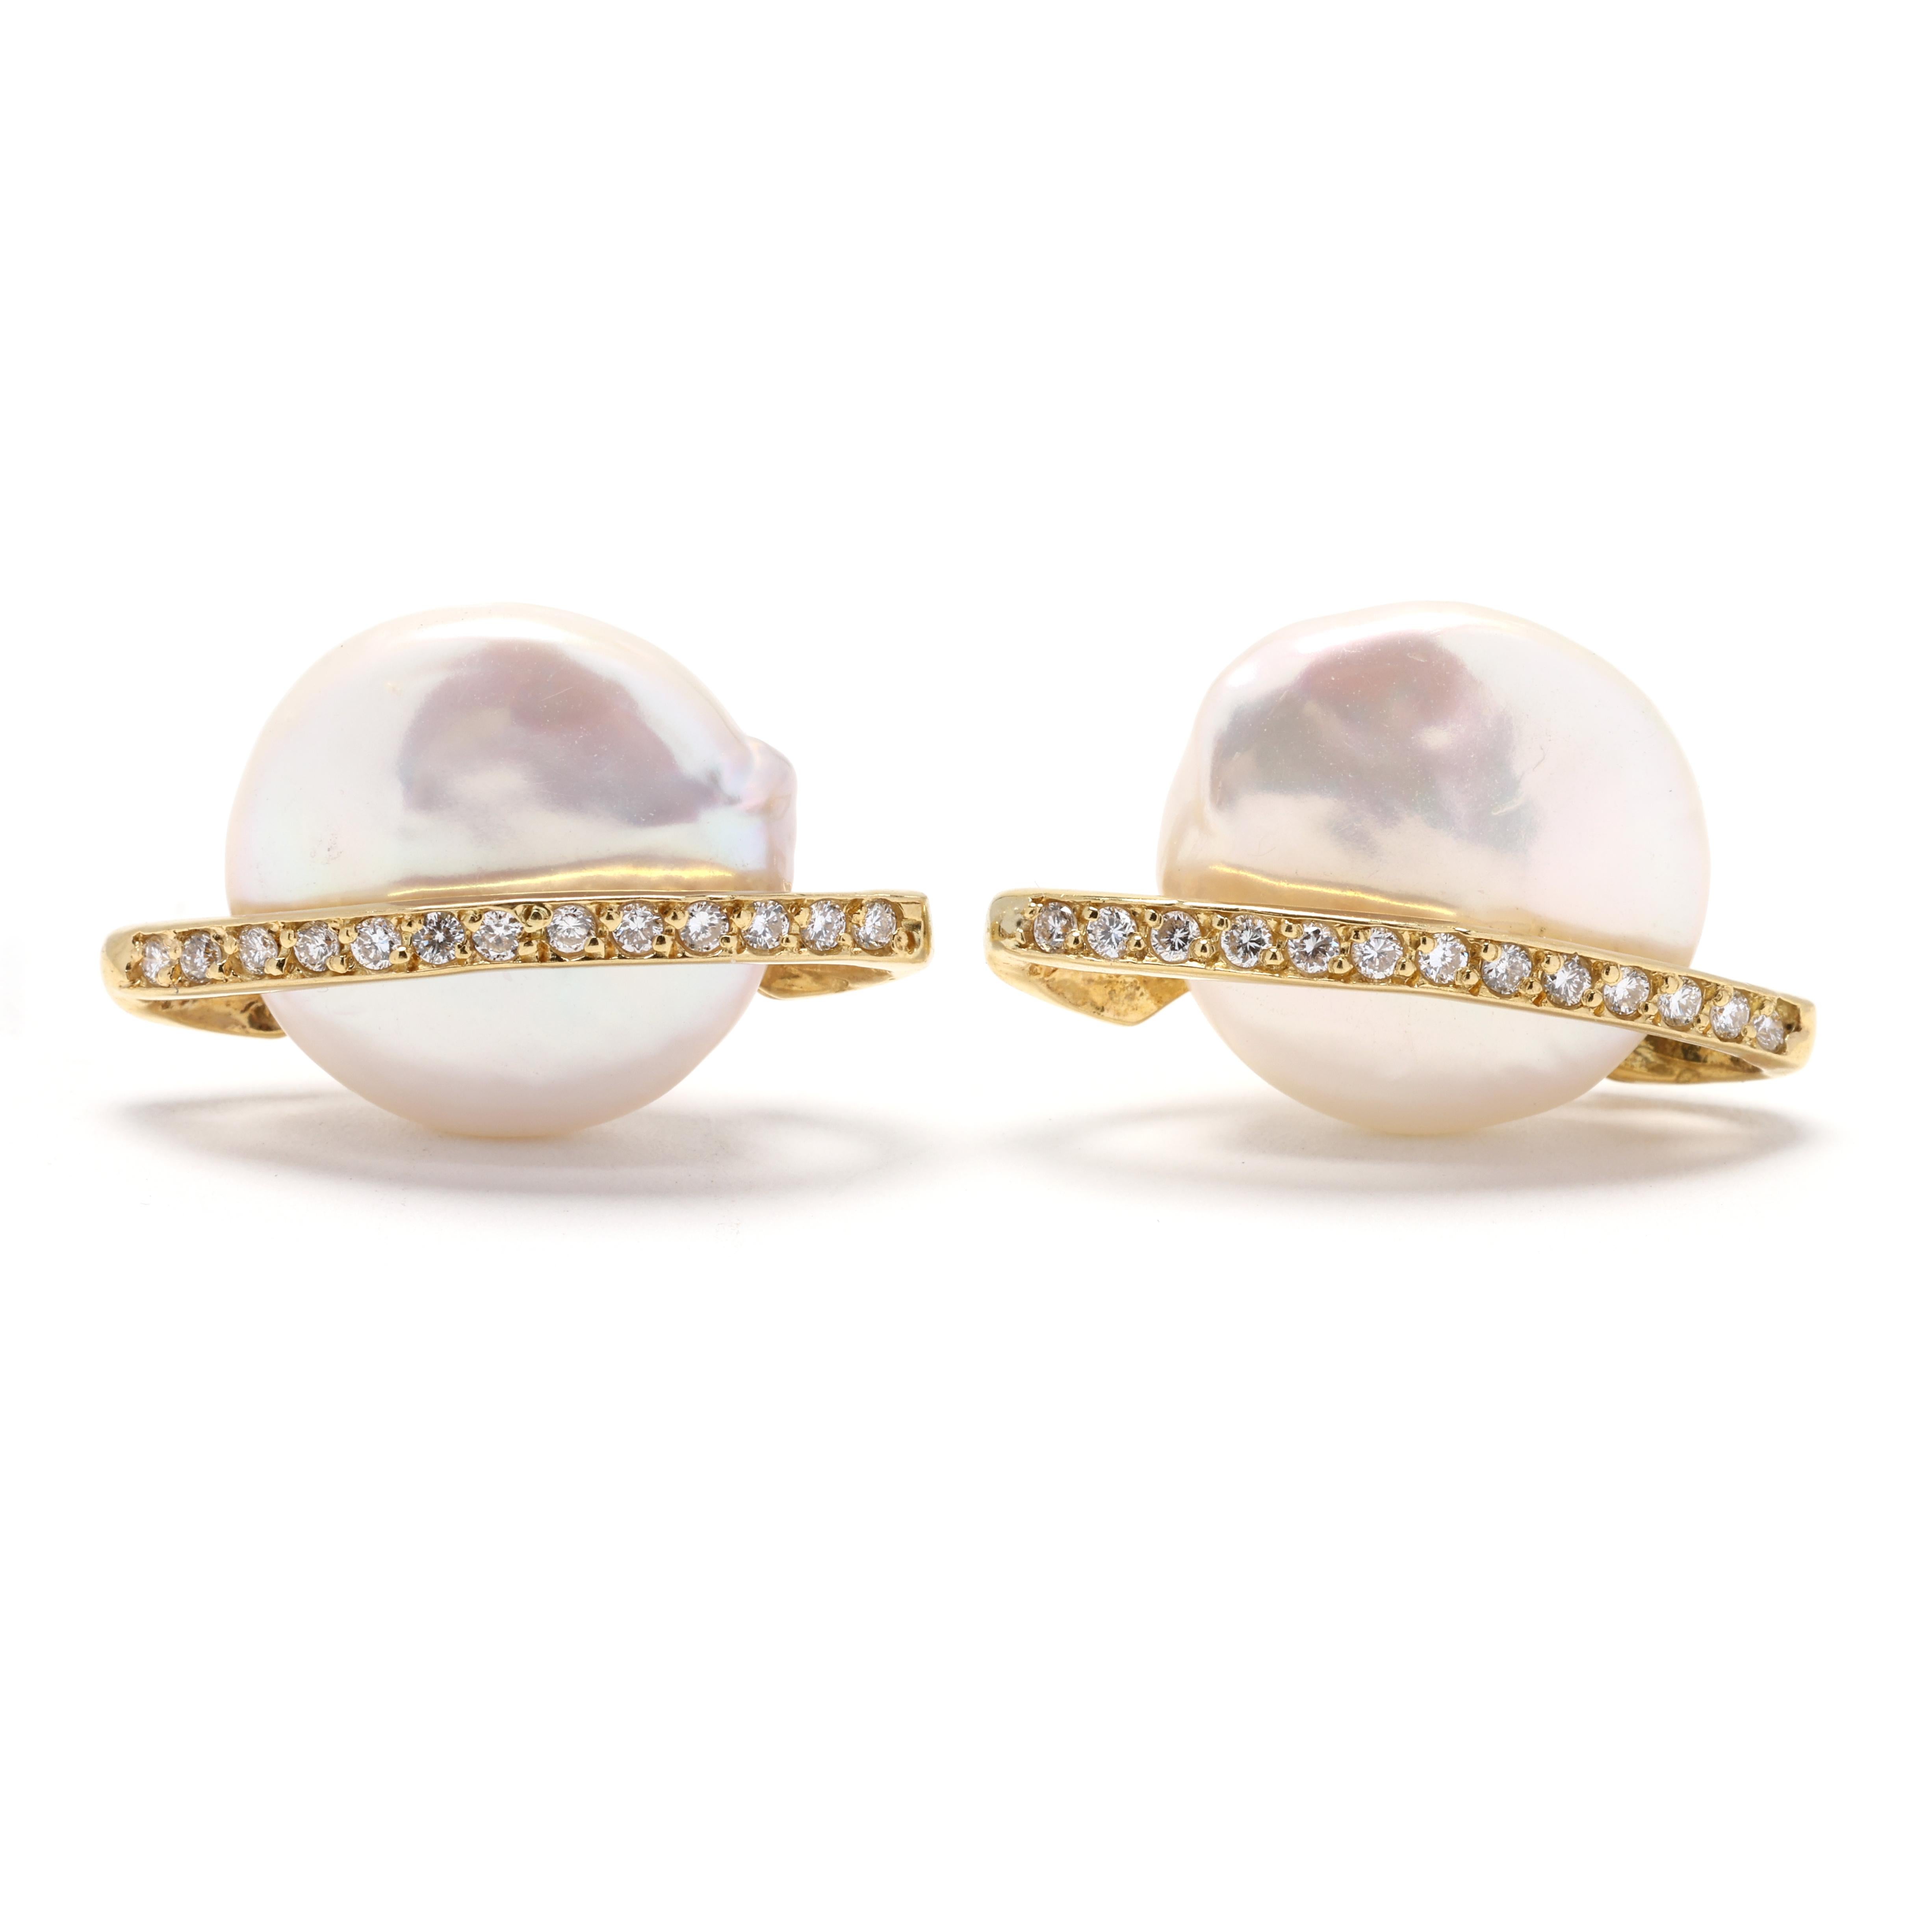 0.25ct Diamond and Pearl Earrings, 18k Yellow Gold, Large Button Pearl  For Sale